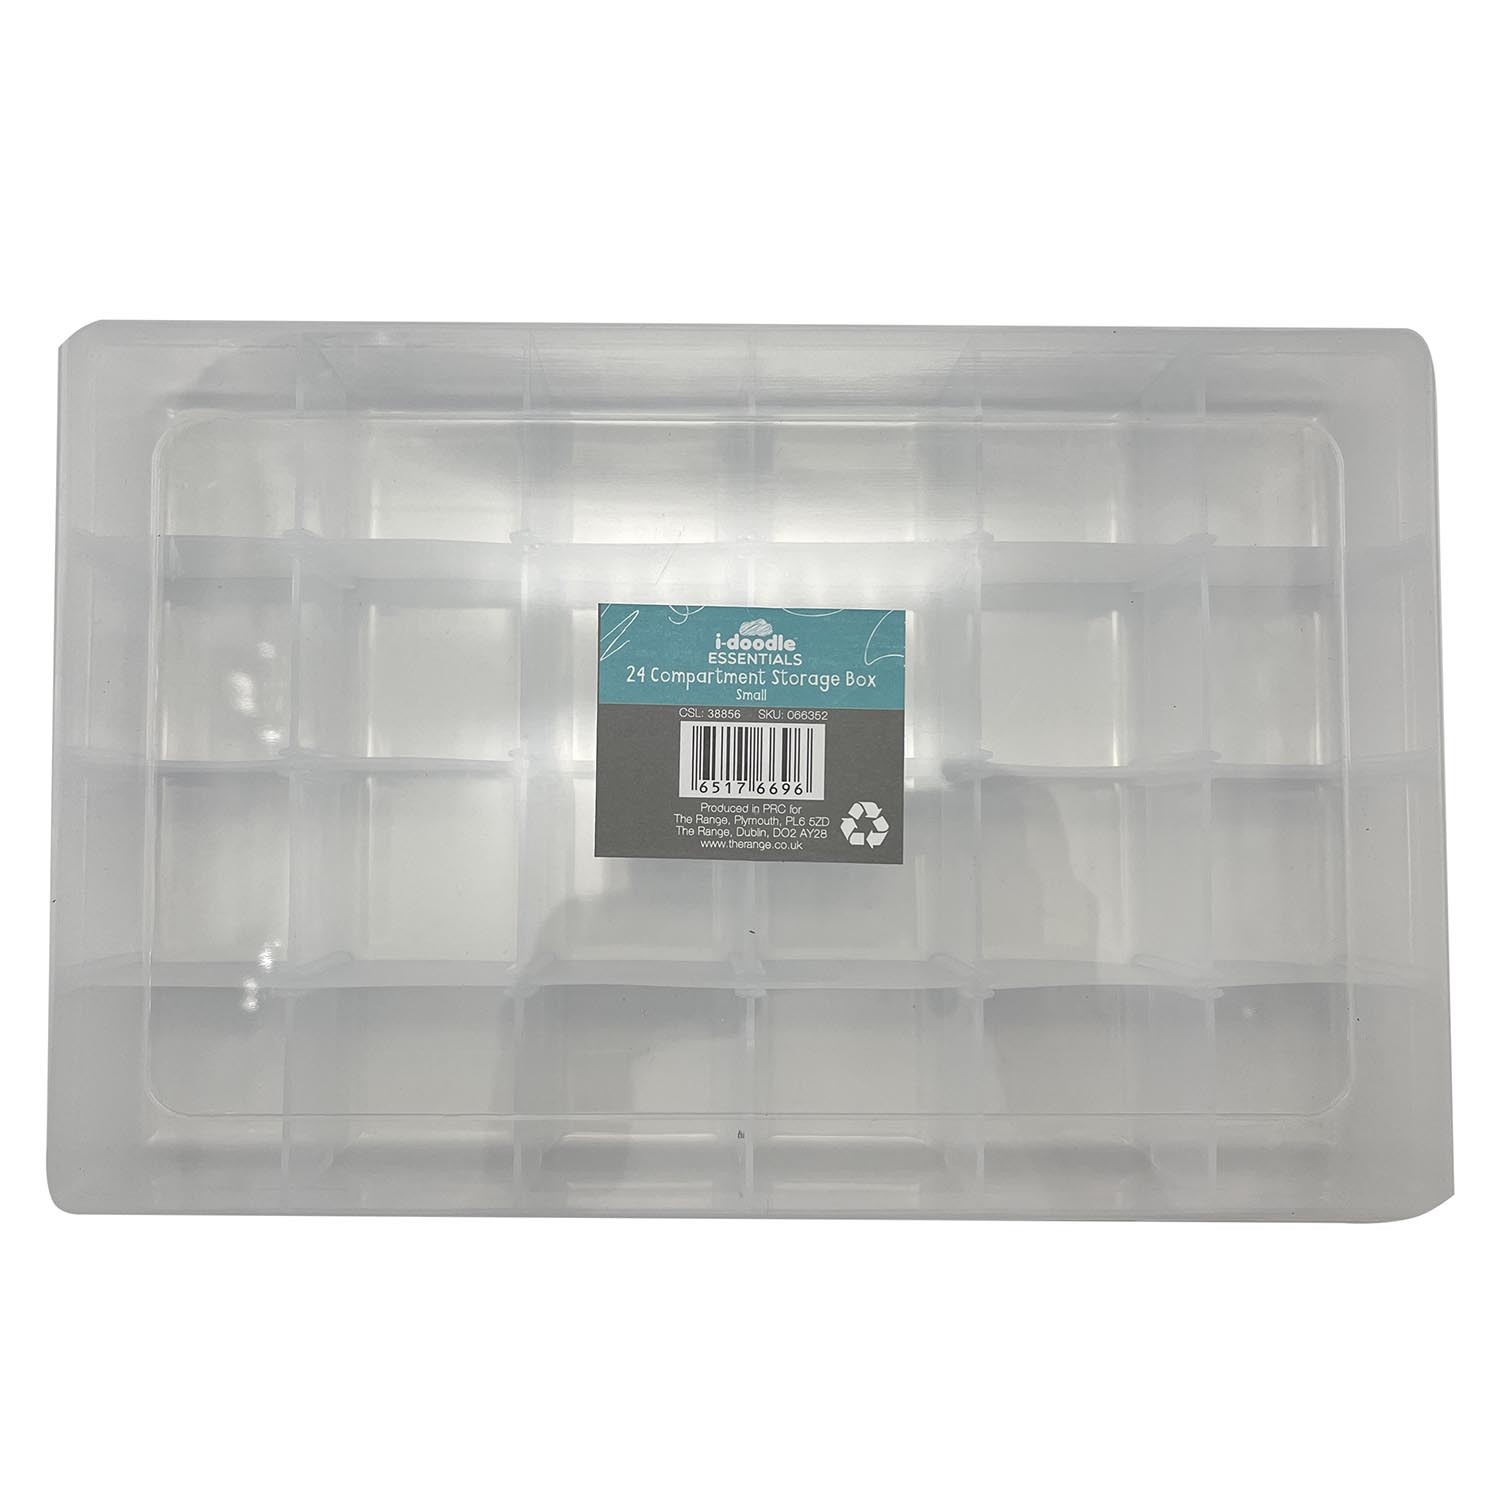 24 Clear Compartment Storage Box Image